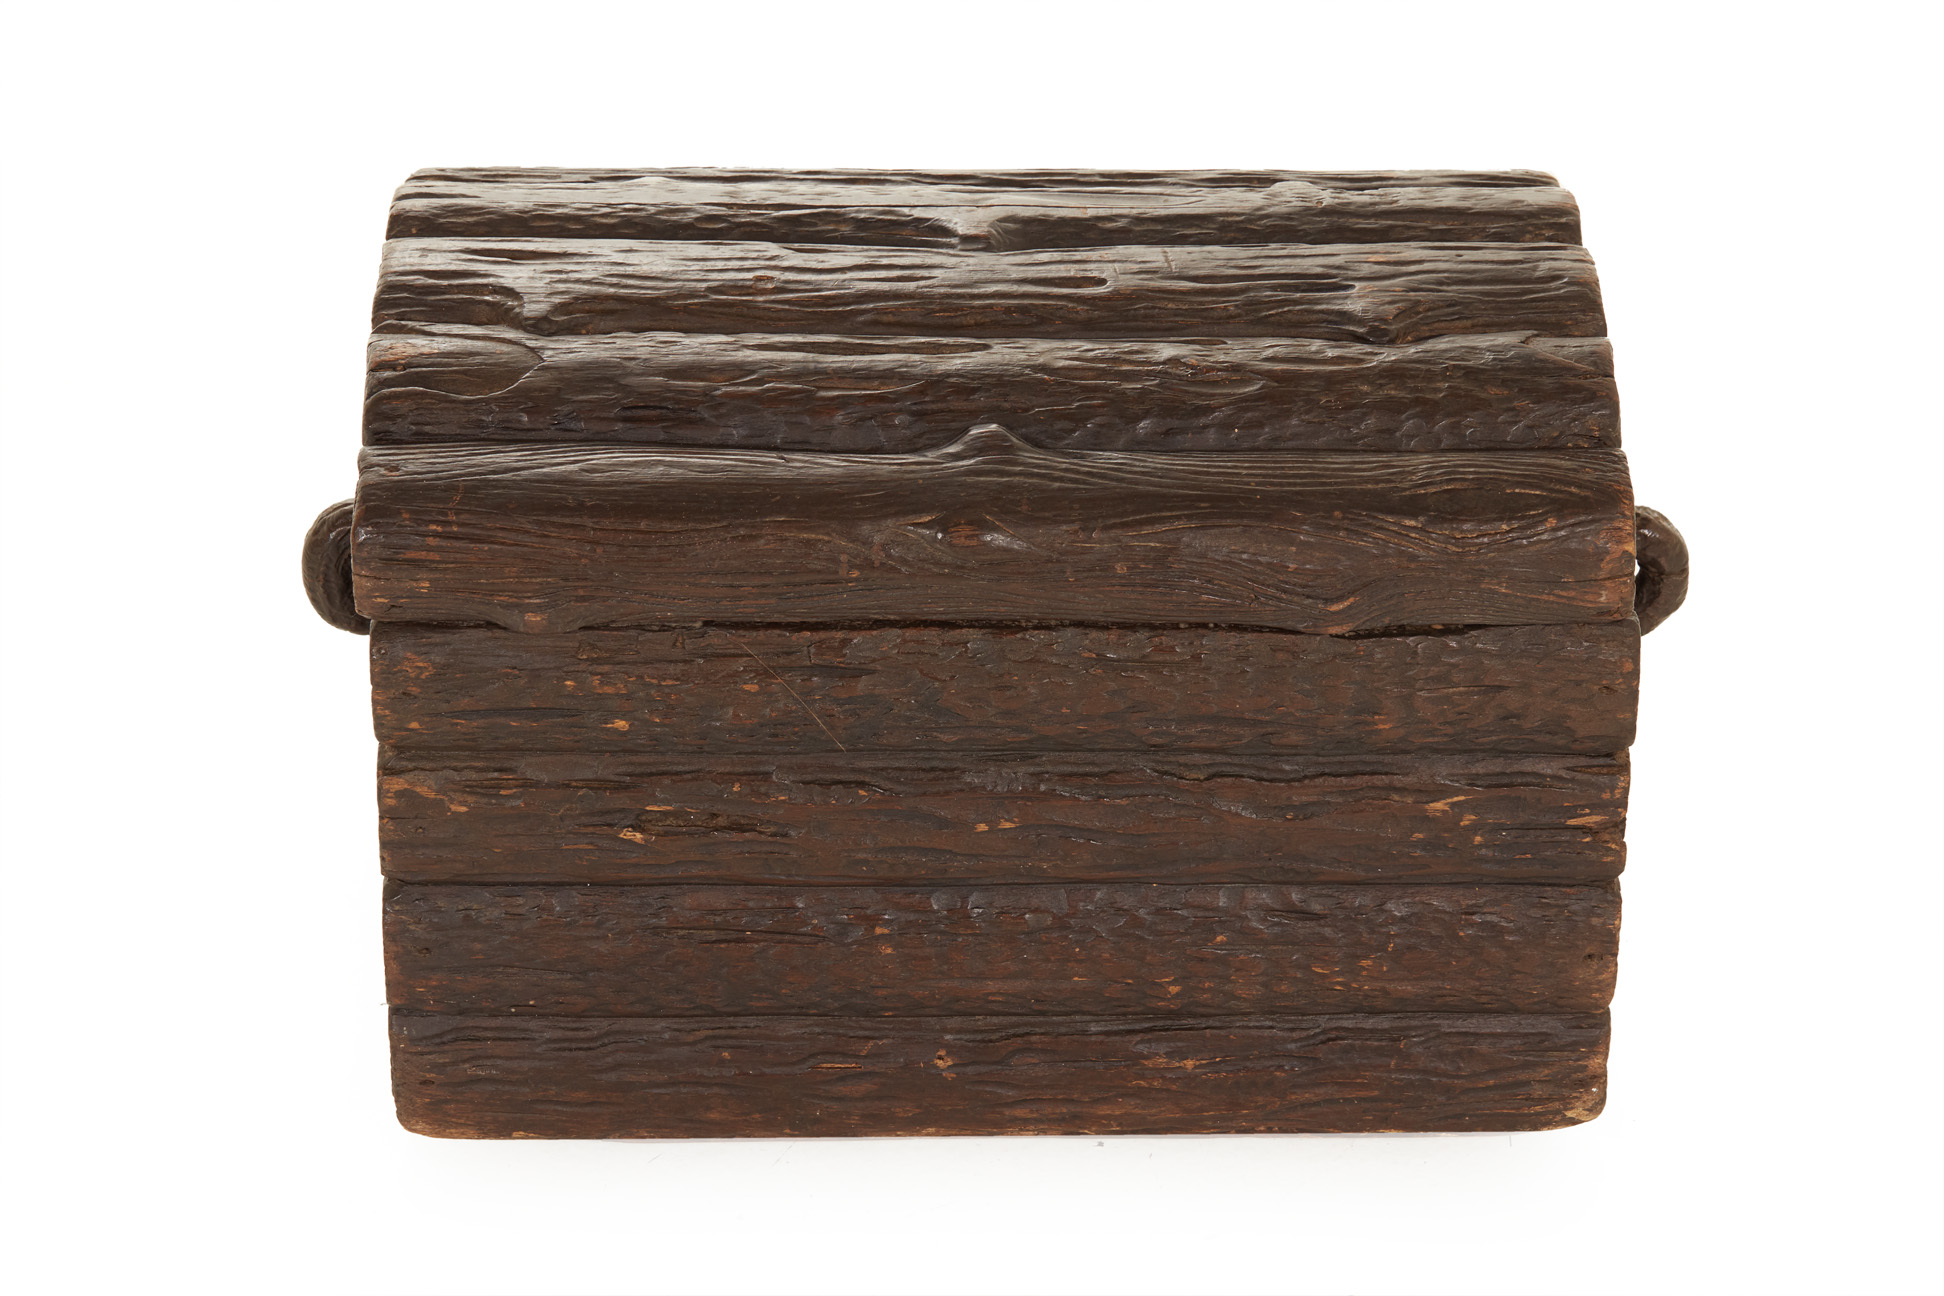 A BLACK FOREST CARVED BOX